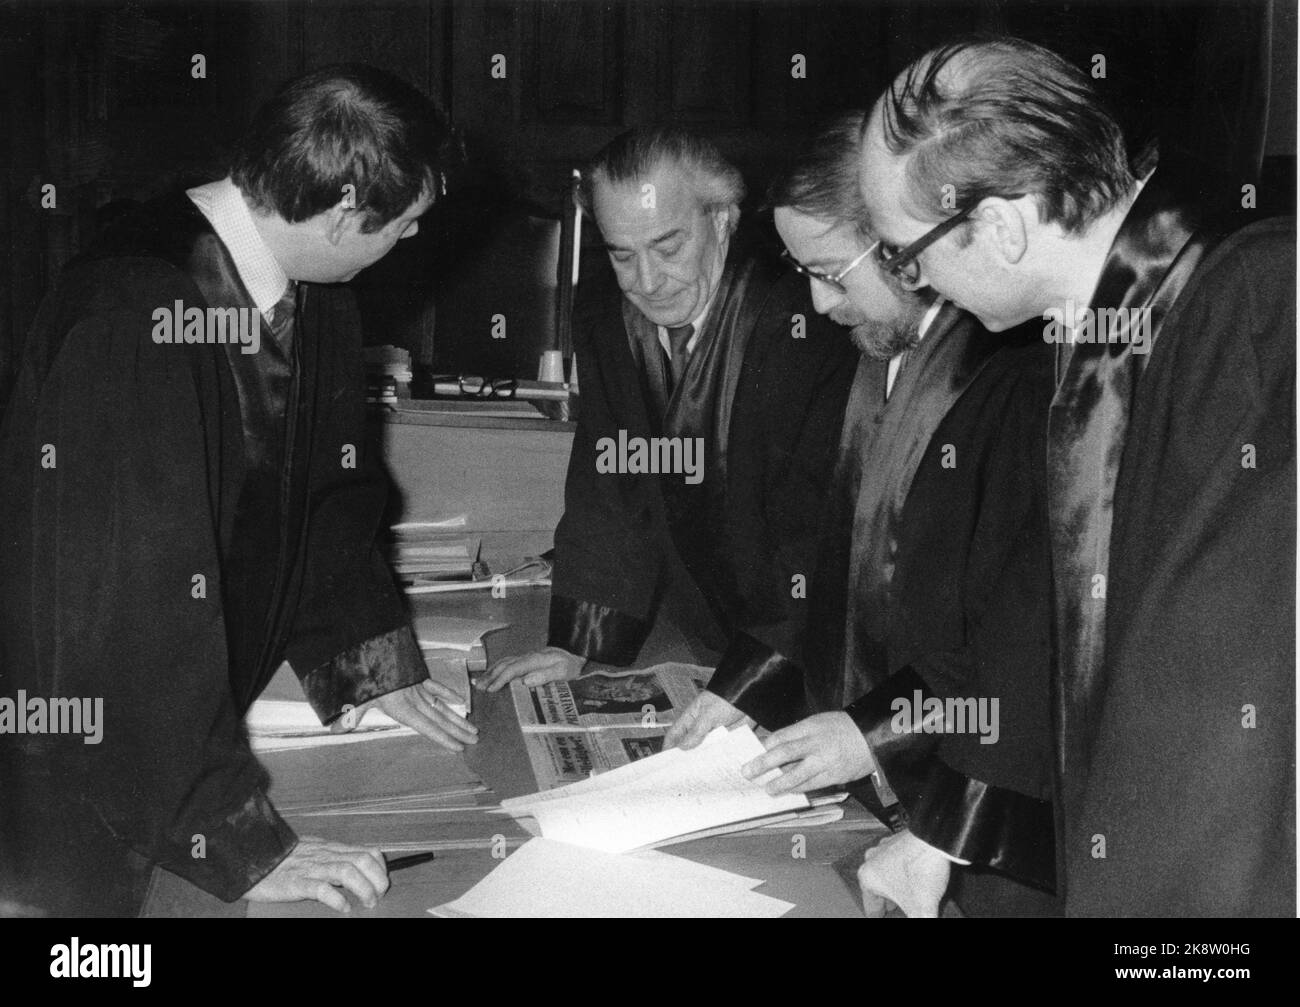 Oslo 19790214: New Tid case / List case: Articles on the secret services in Norway that were published in SV's party newspaper Ny Tid led to litigation against the newspaper and against the interview subjects. Listening case in Oslo City Court. The prosecutor in the list case Arne Huuse (TV) discusses with the three defenders, from V: the lawyers Alf Nordhus, Ole Jakob Bae and Kjell Amundsen. Photo: NTB / NTB Stock Photo